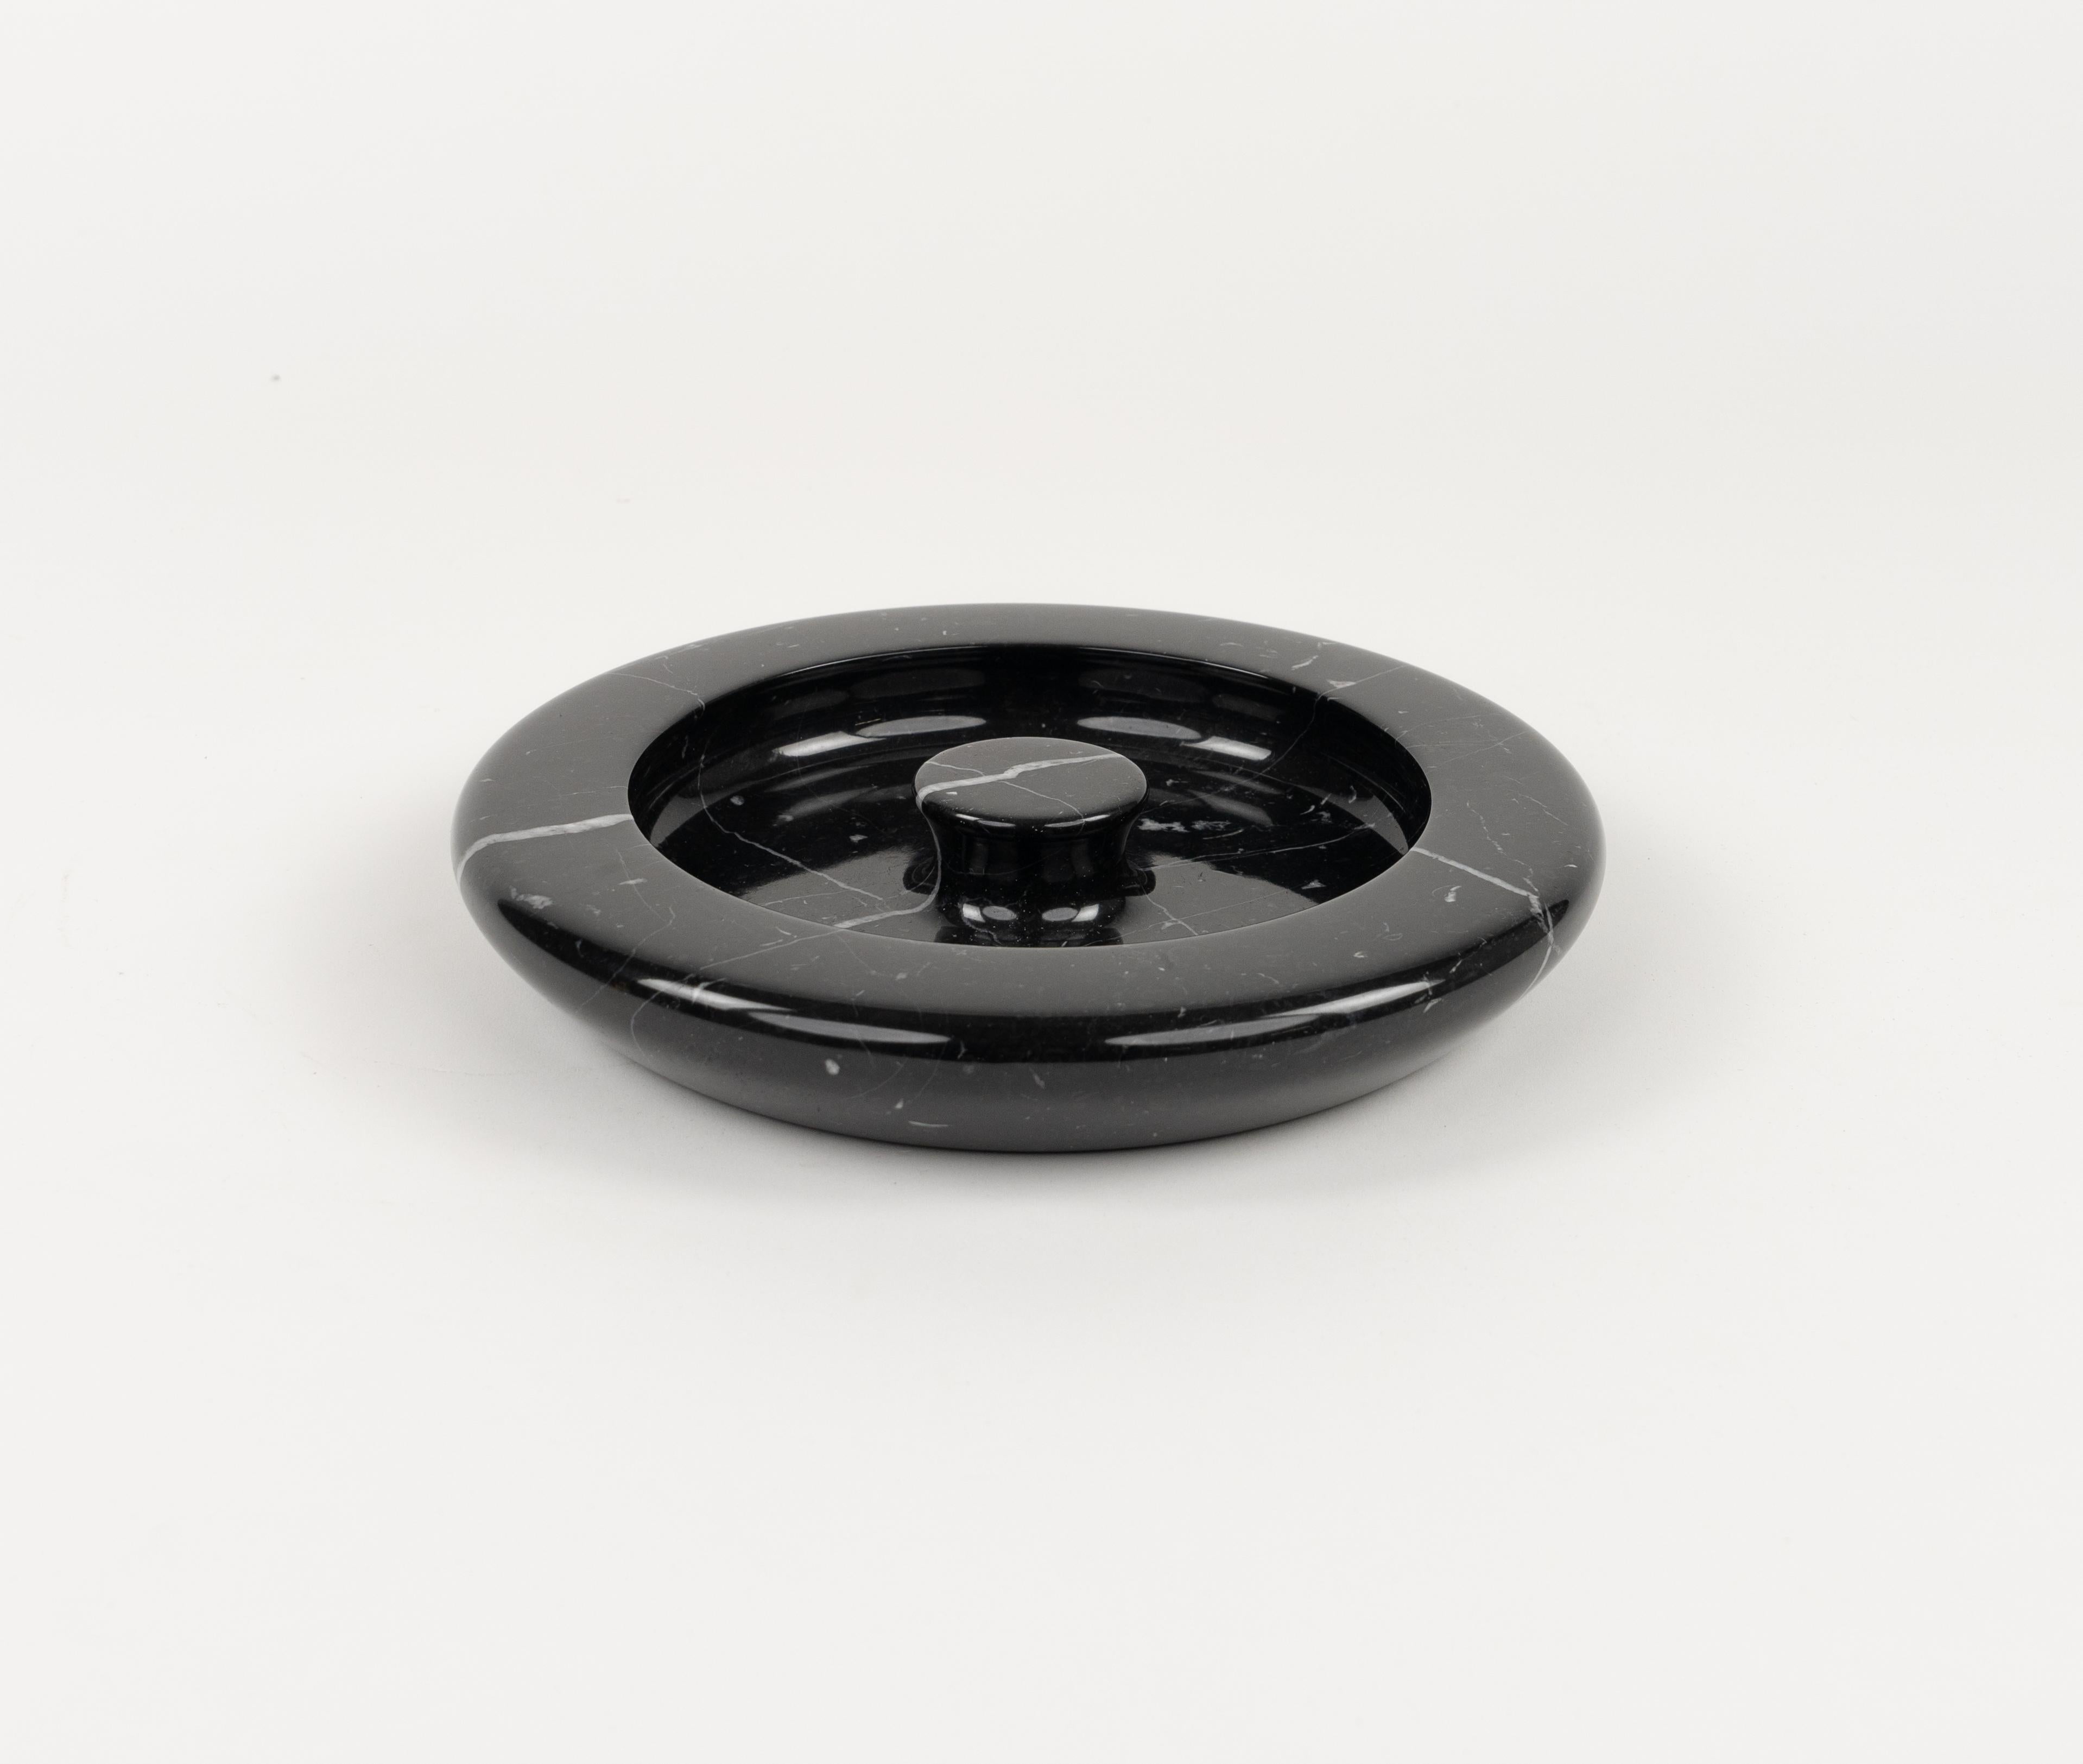 Black Marble Ashtray or Vide-Poche attributed to Angelo Mangiarotti, Italy 1970s For Sale 9